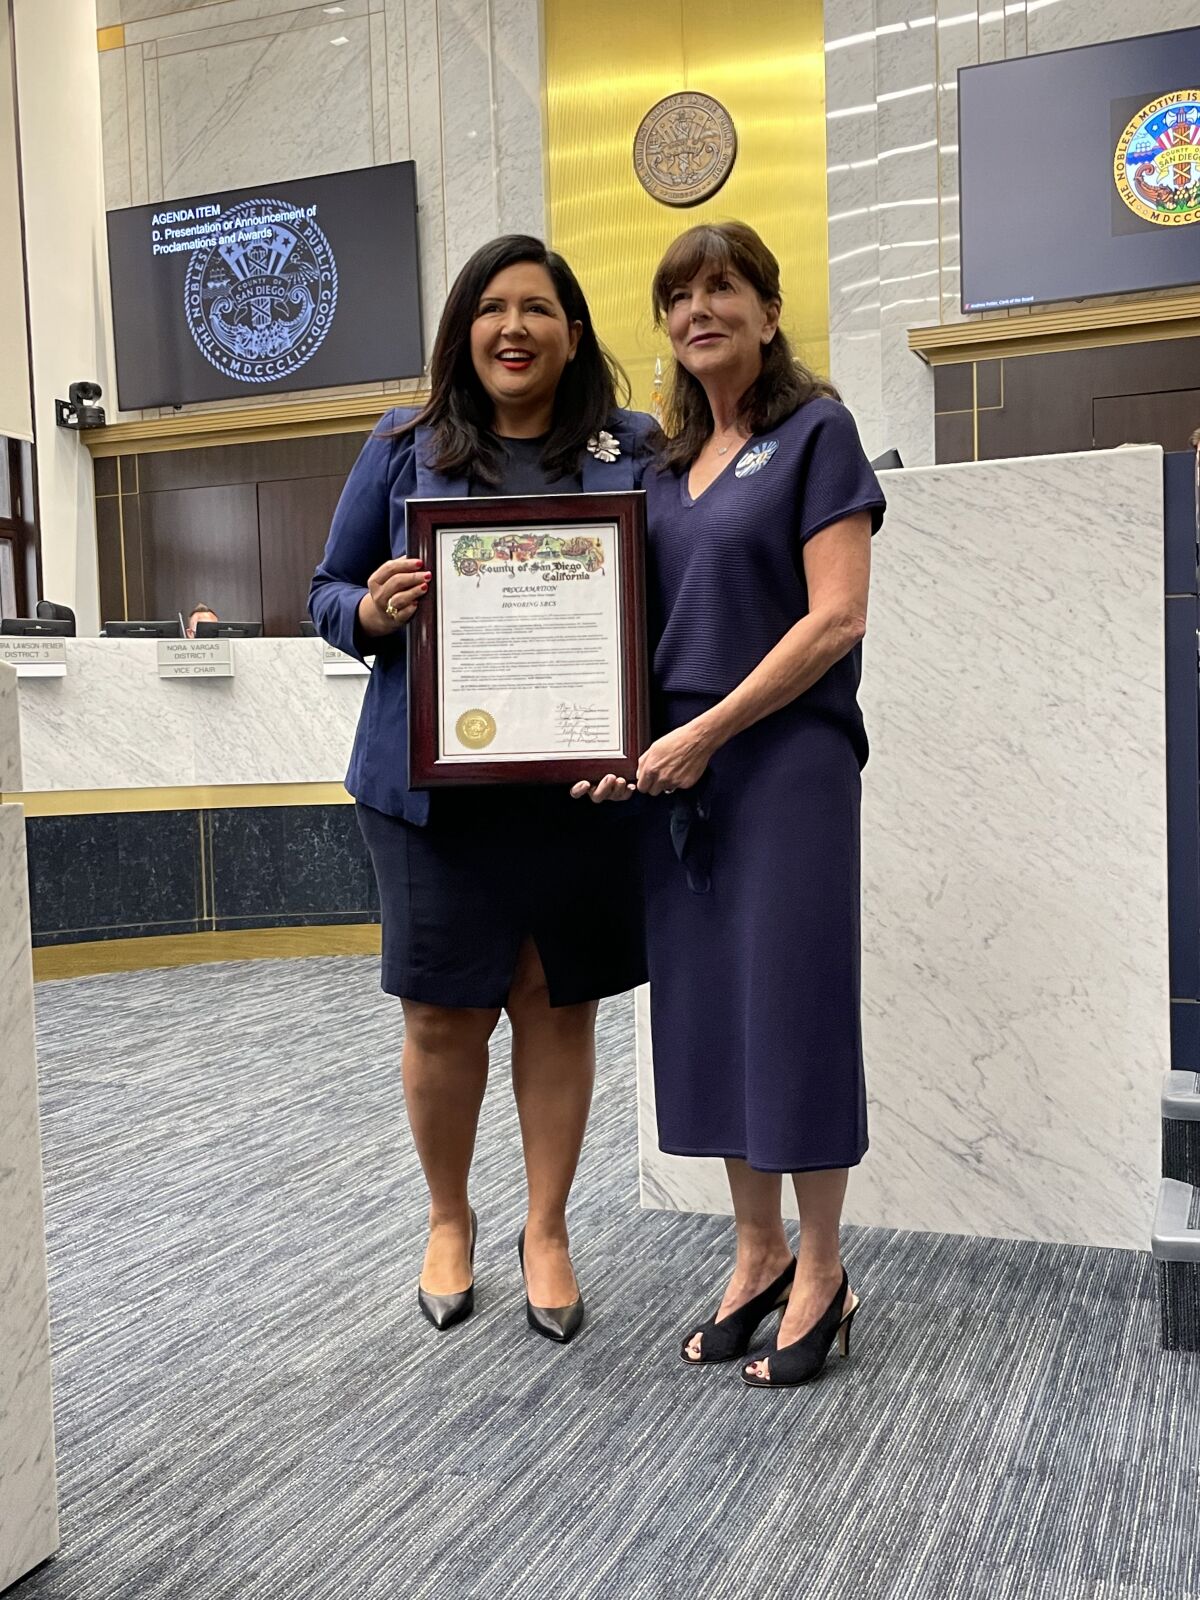 Supervisor Nora Vargas, left, presents a proclamation to SBCS CEO Kathie Lembo for the nonprofit's 50 years of service.